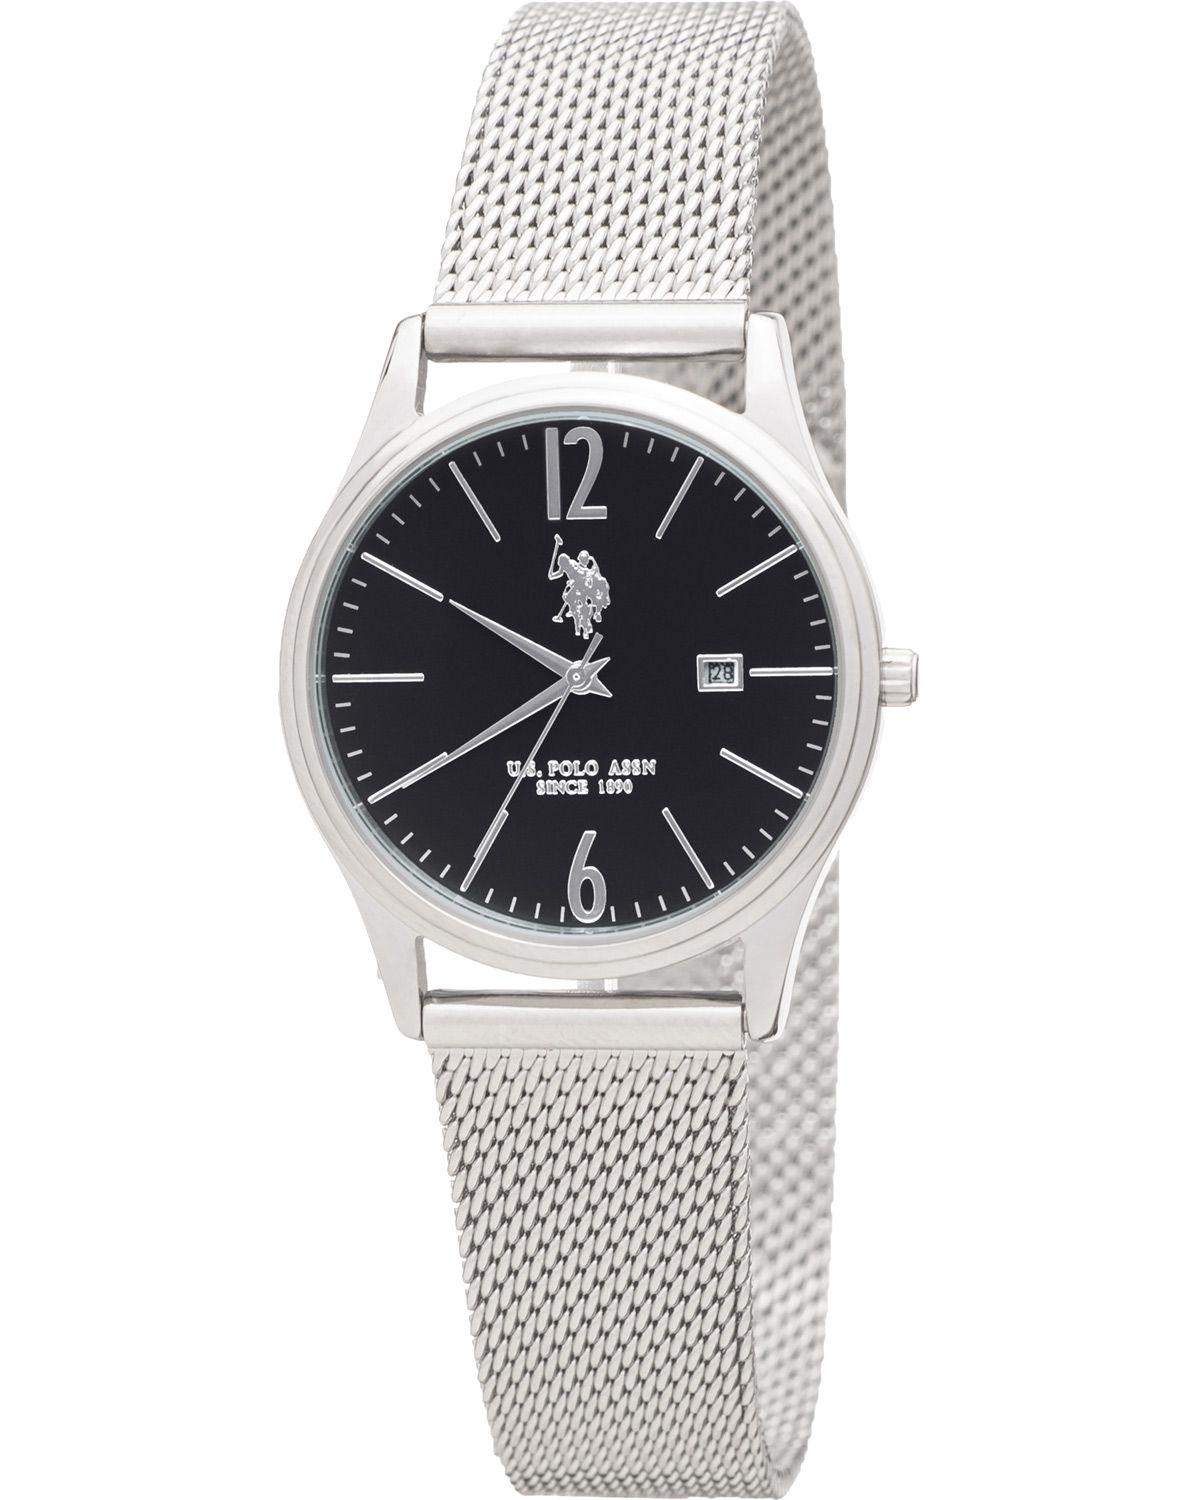 U.S. POLO Blake - USP5985ST , Silver case with Stainless Steel Bracelet